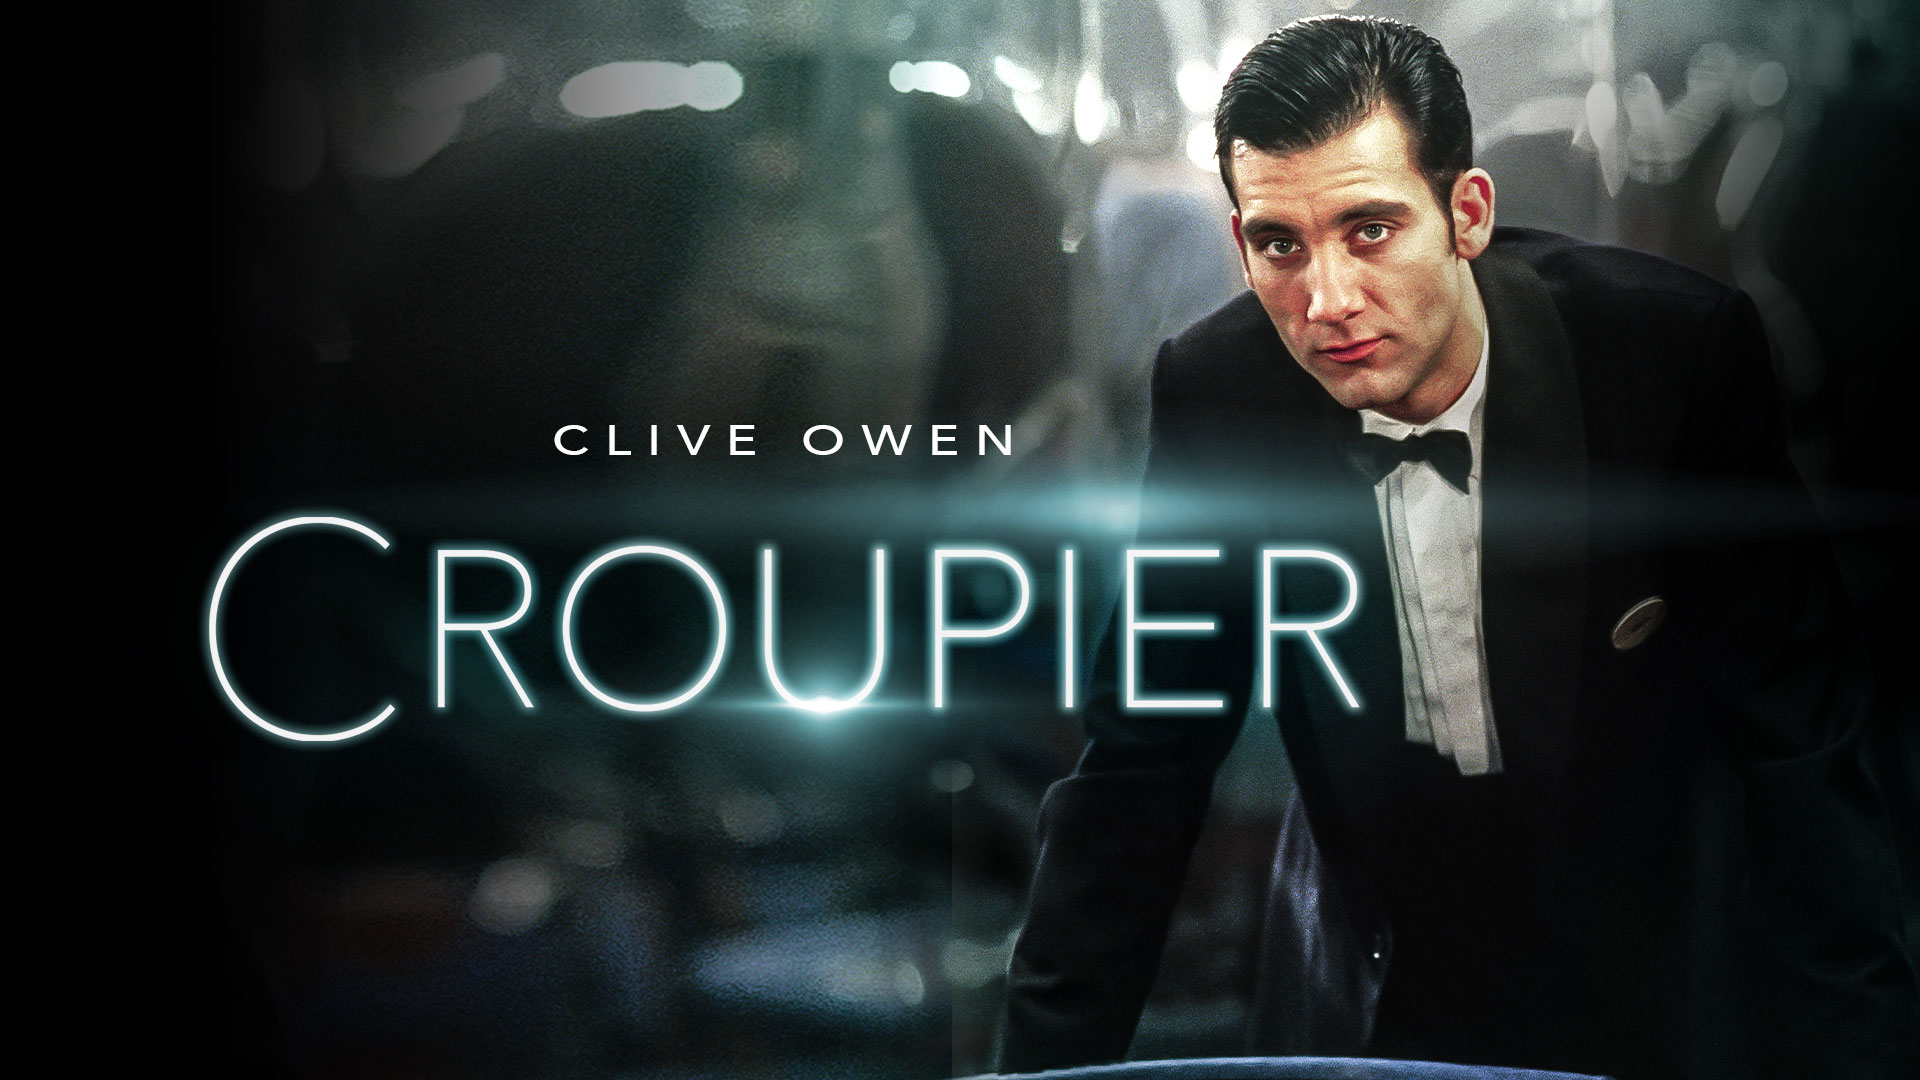 38-facts-about-the-movie-croupier